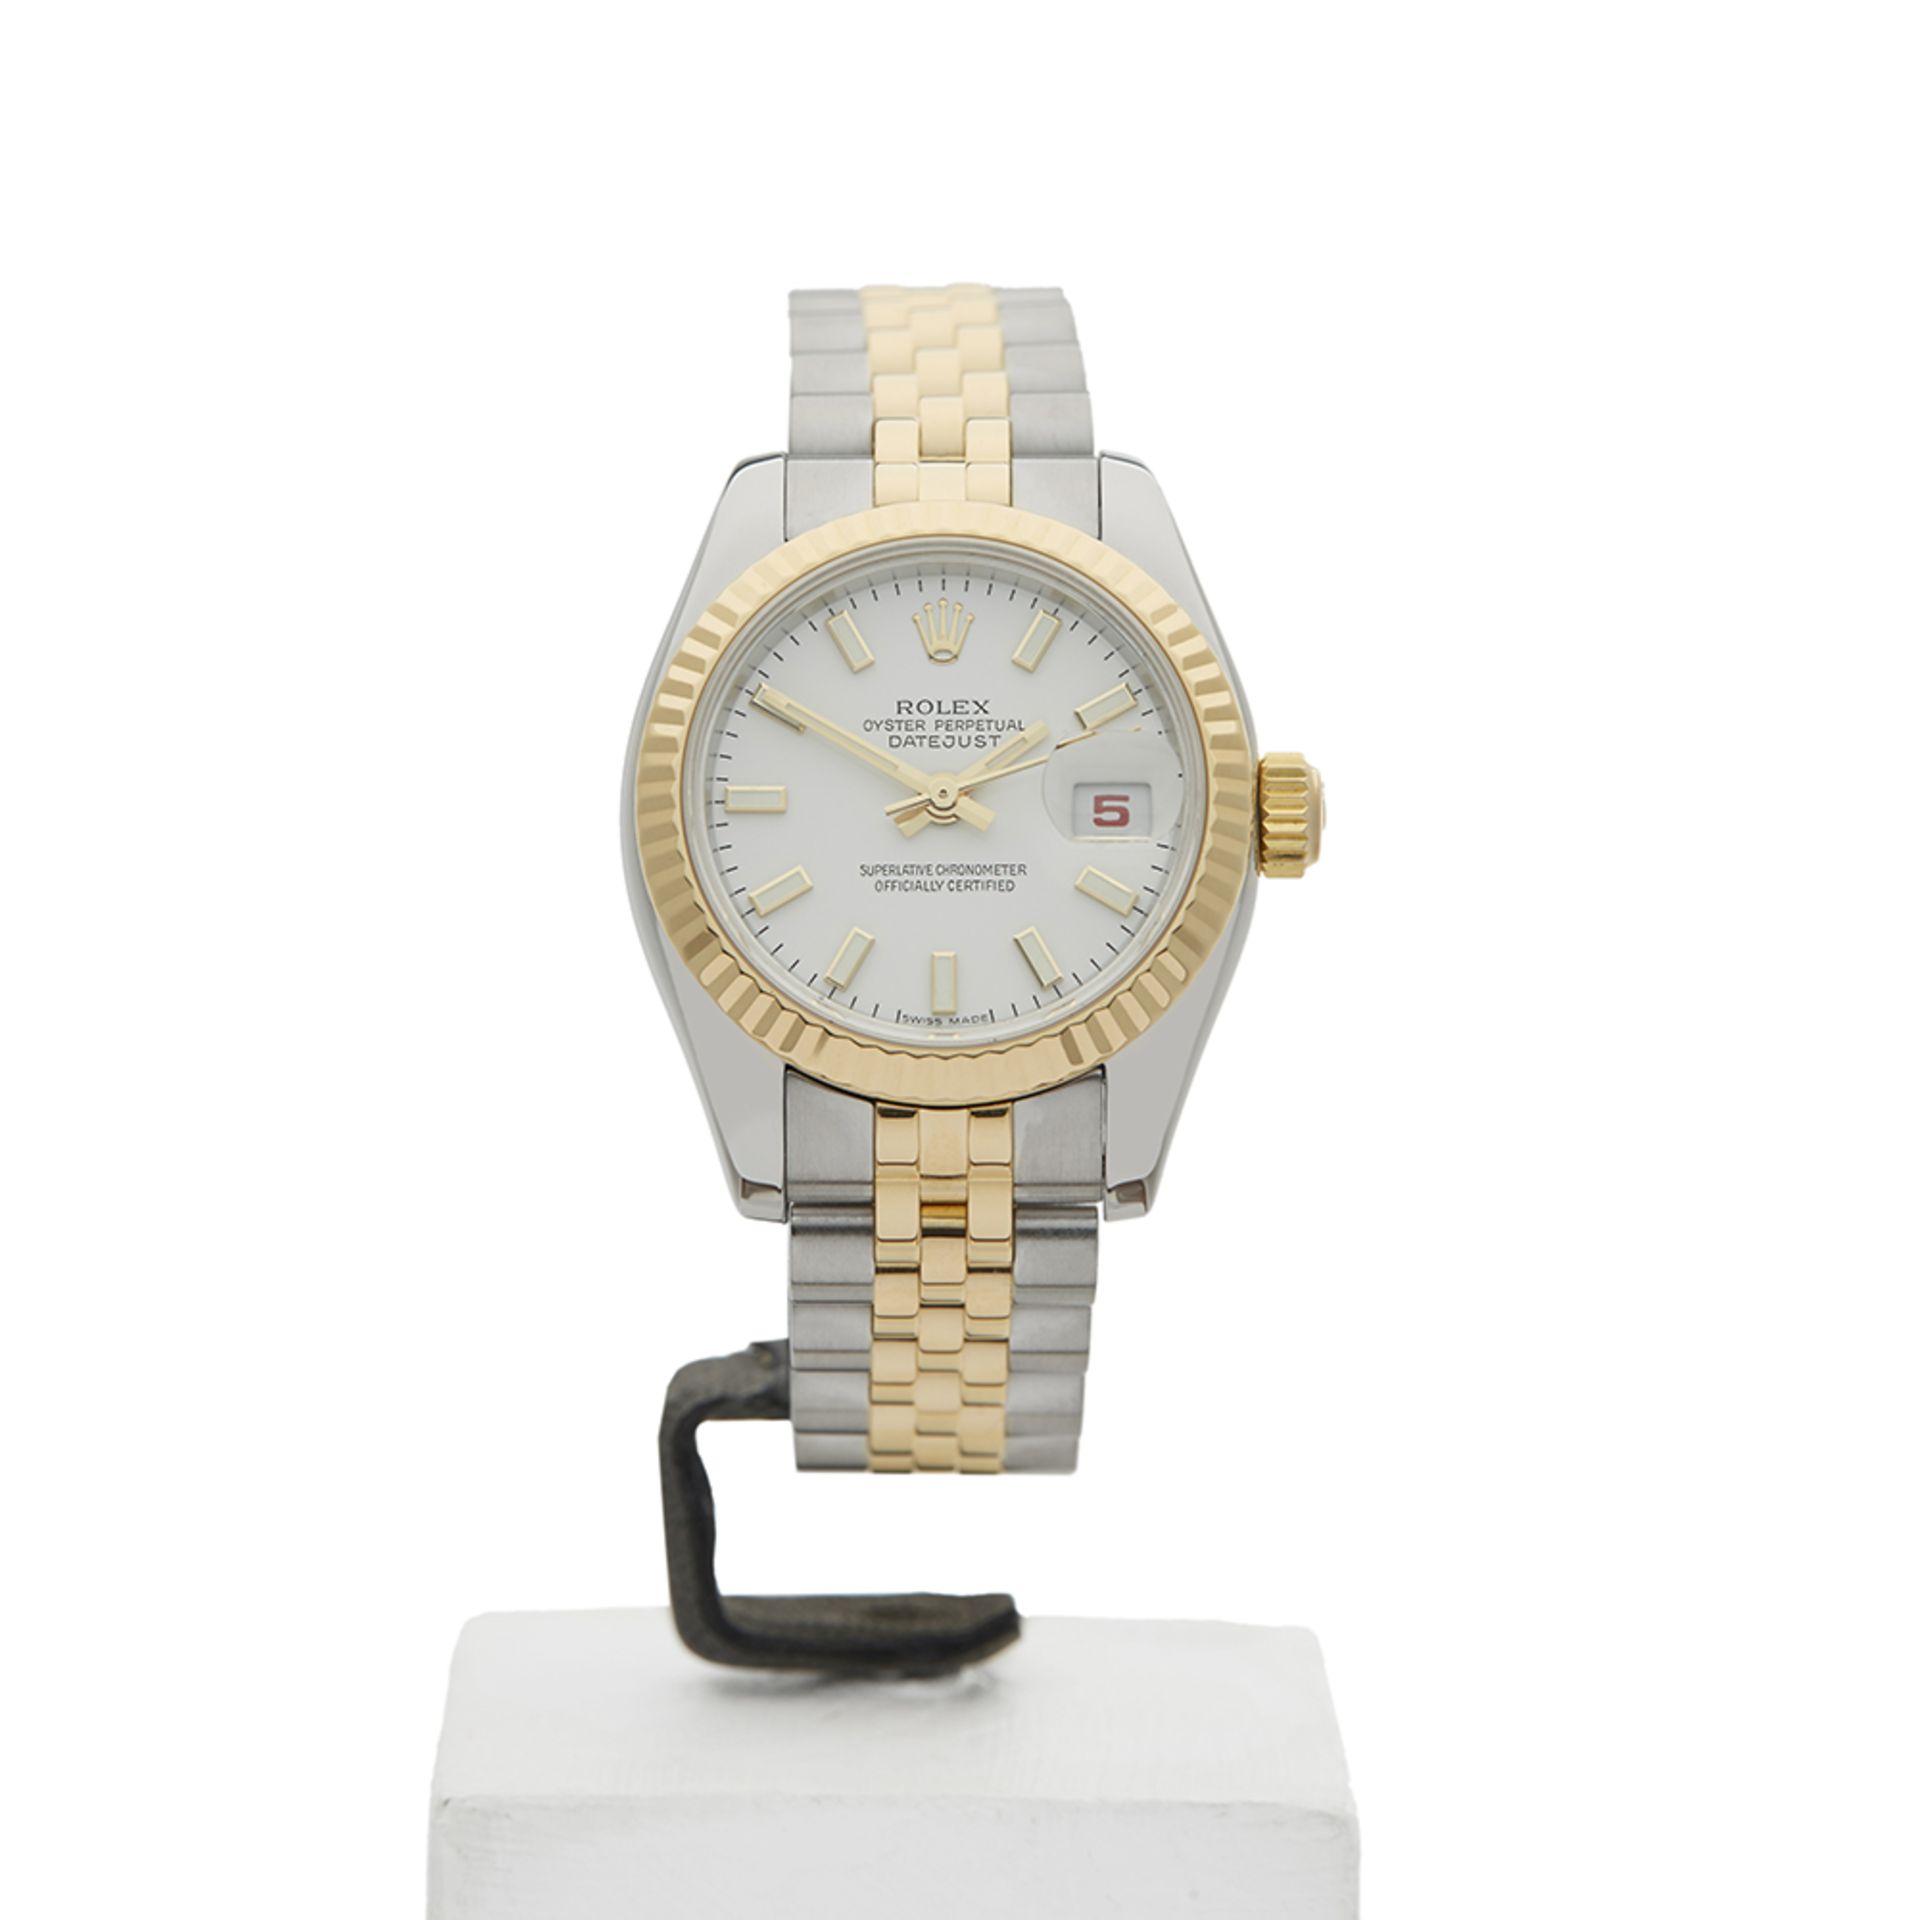 Datejust 26mm Stainless Steel & 18K Yellow Gold - 179173 - Image 2 of 9